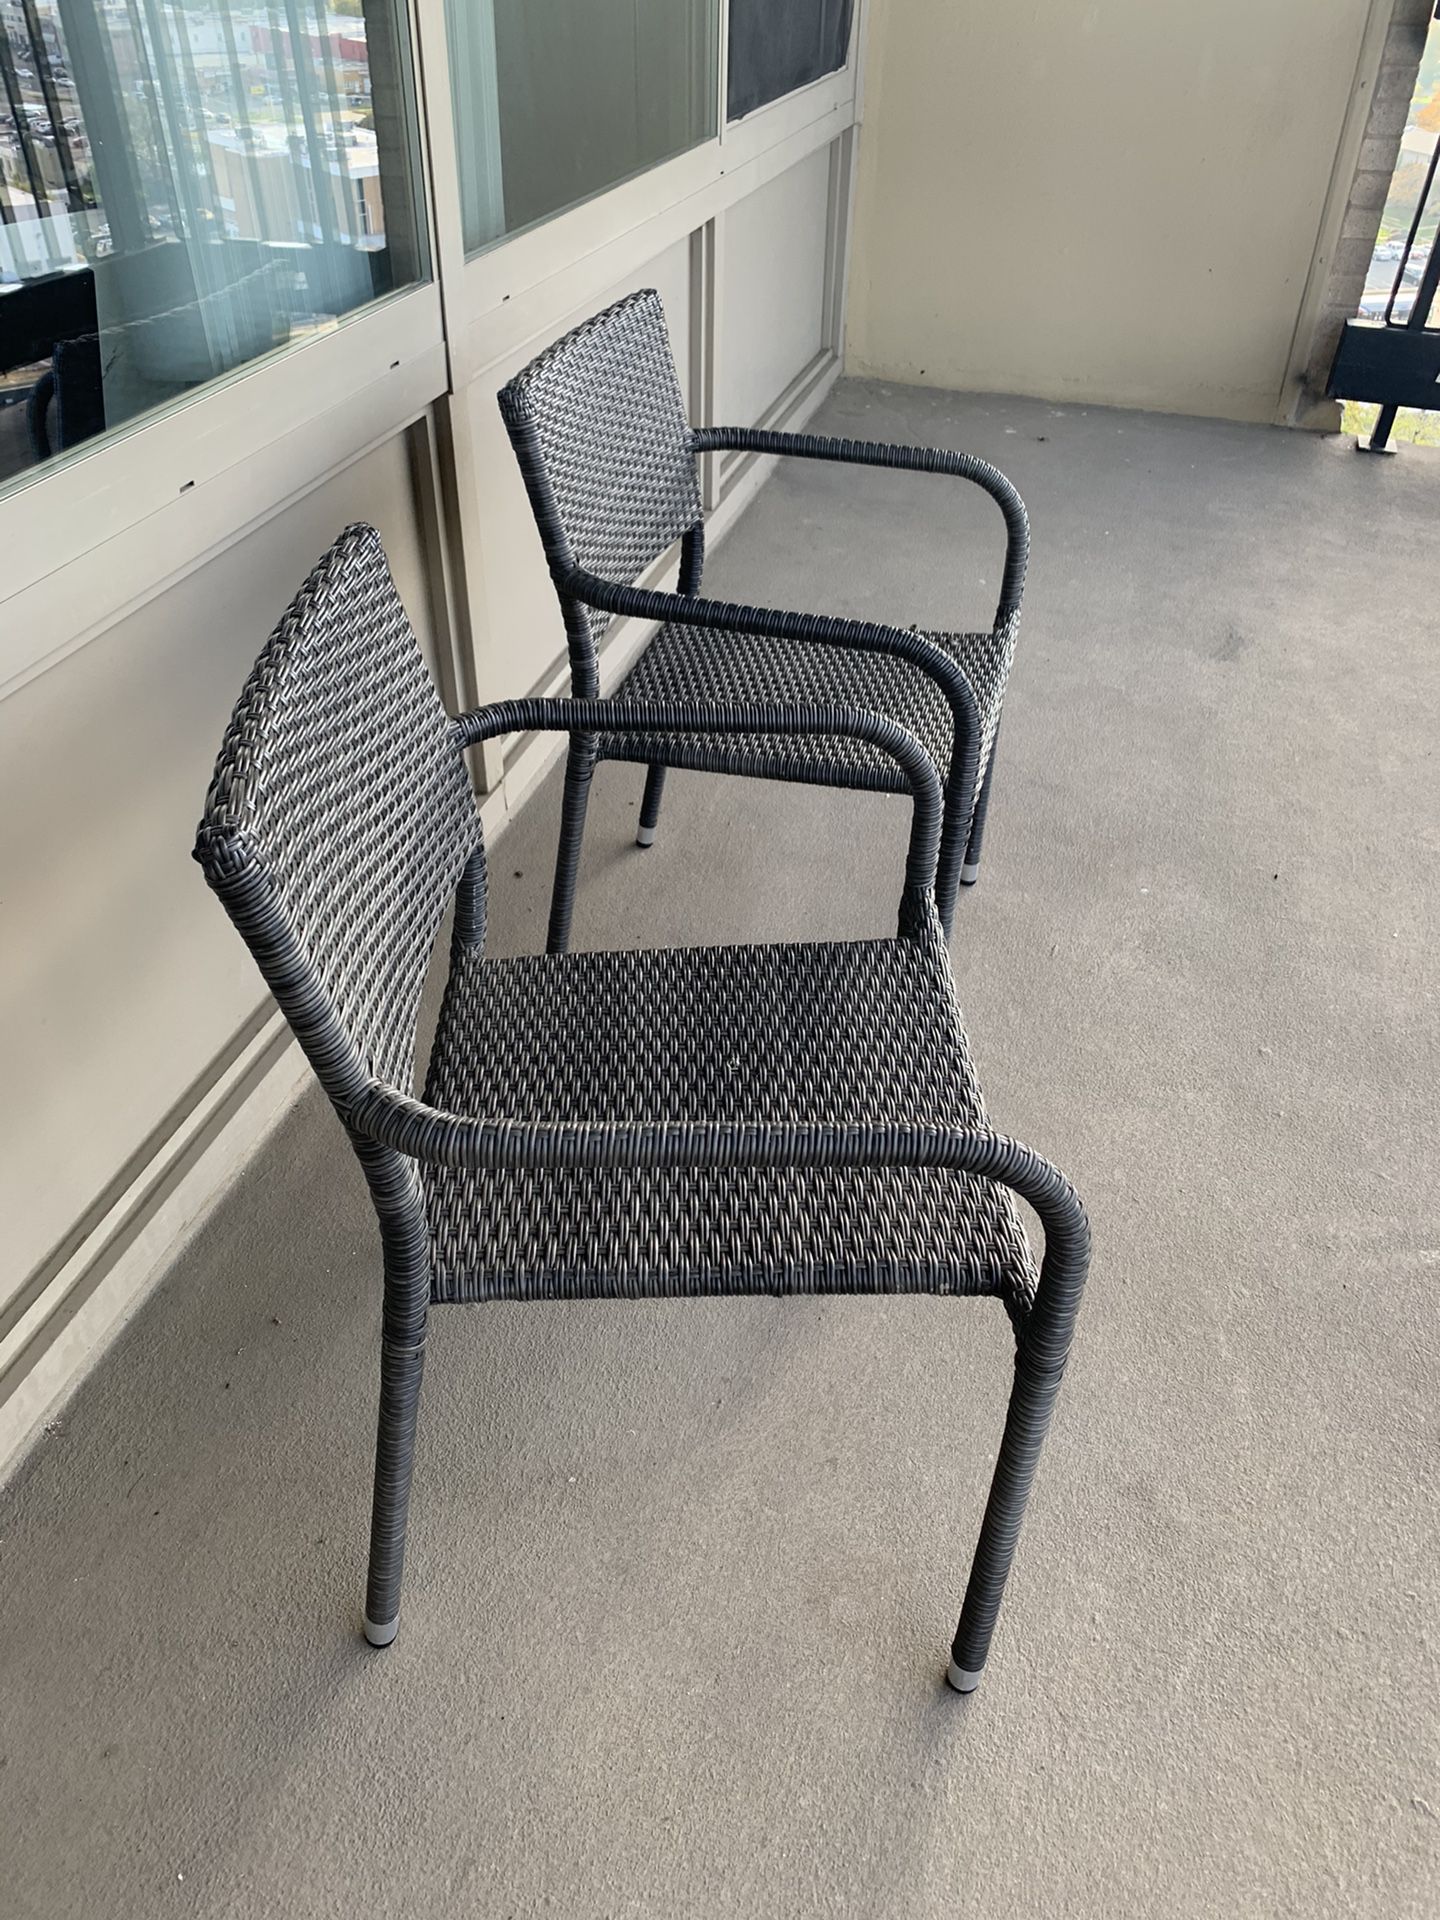 Two outdoor chairs for sale